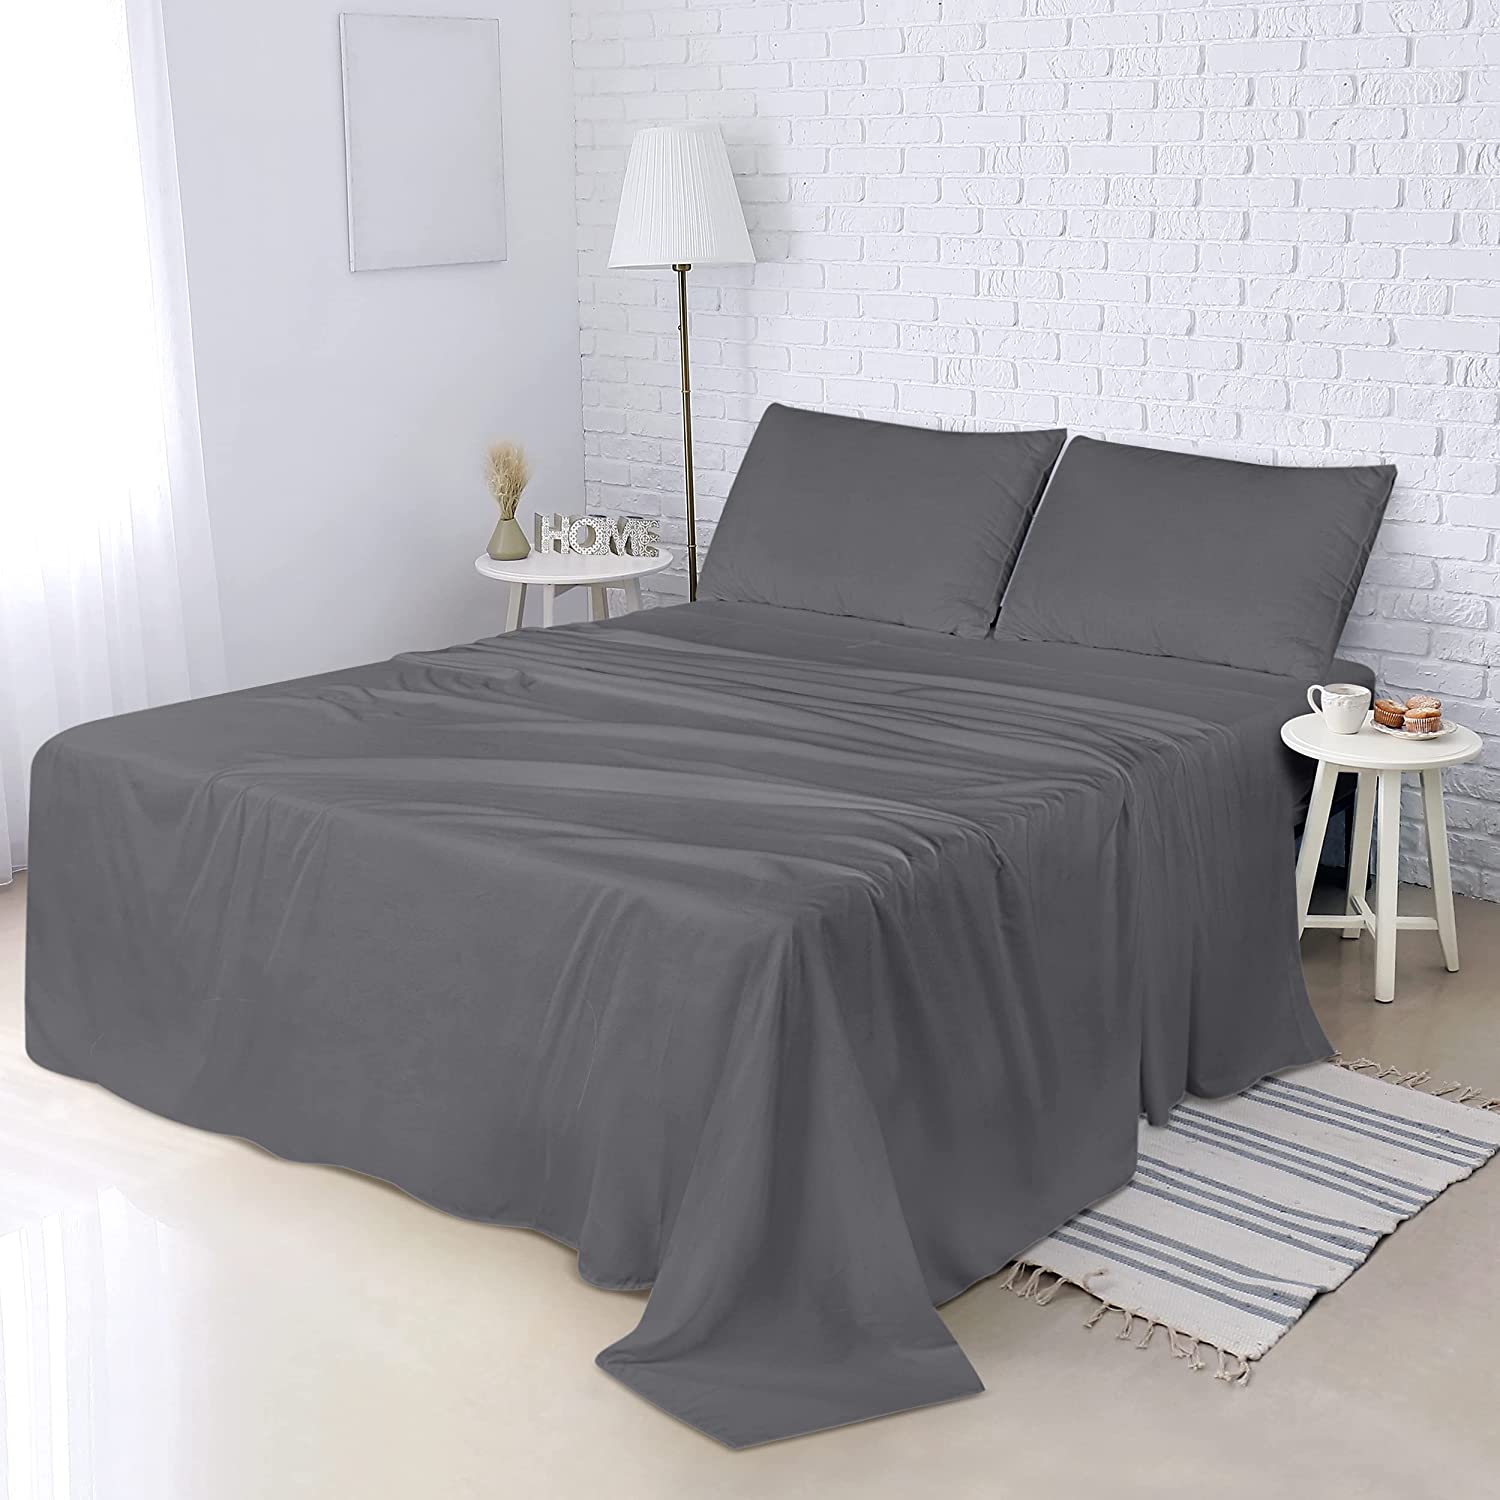 Utopia Bedding Queen Bed Sheets Set - 4 Piece Bedding - Brushed Microfiber  - Shrinkage and Fade Resistant - Easy